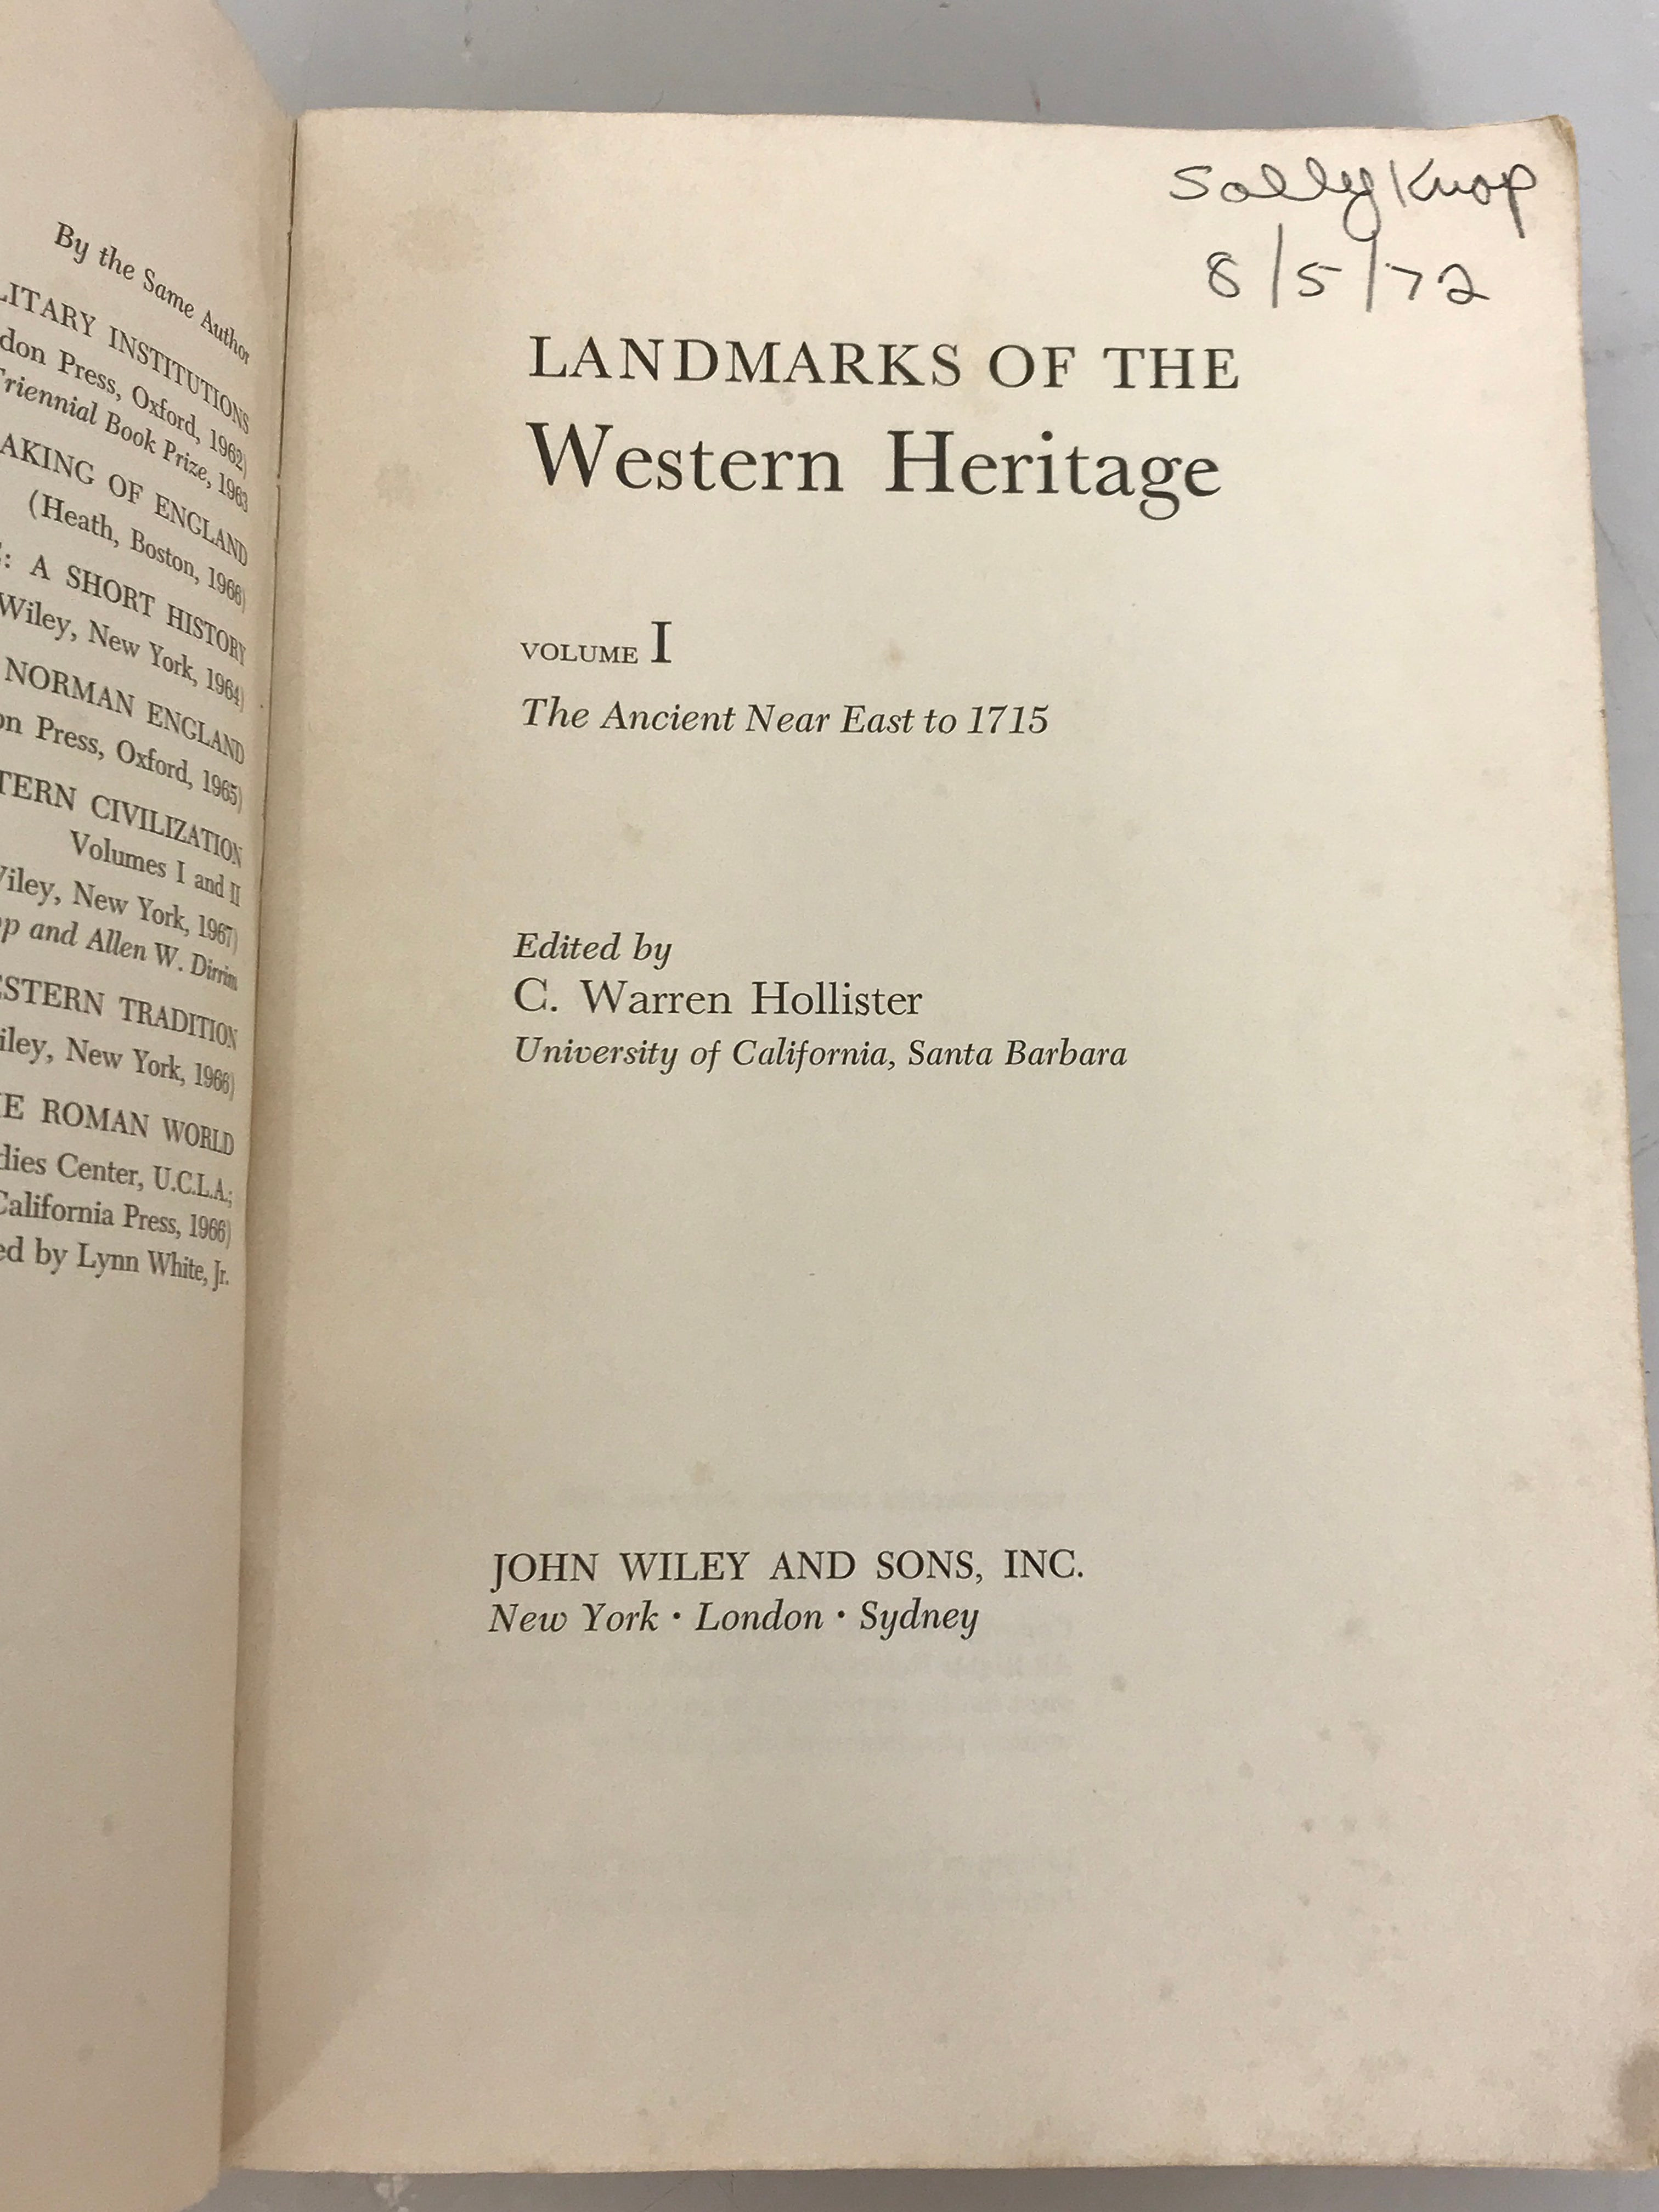 Landmarks of the Western Heritage Volume I: The Ancient Near East